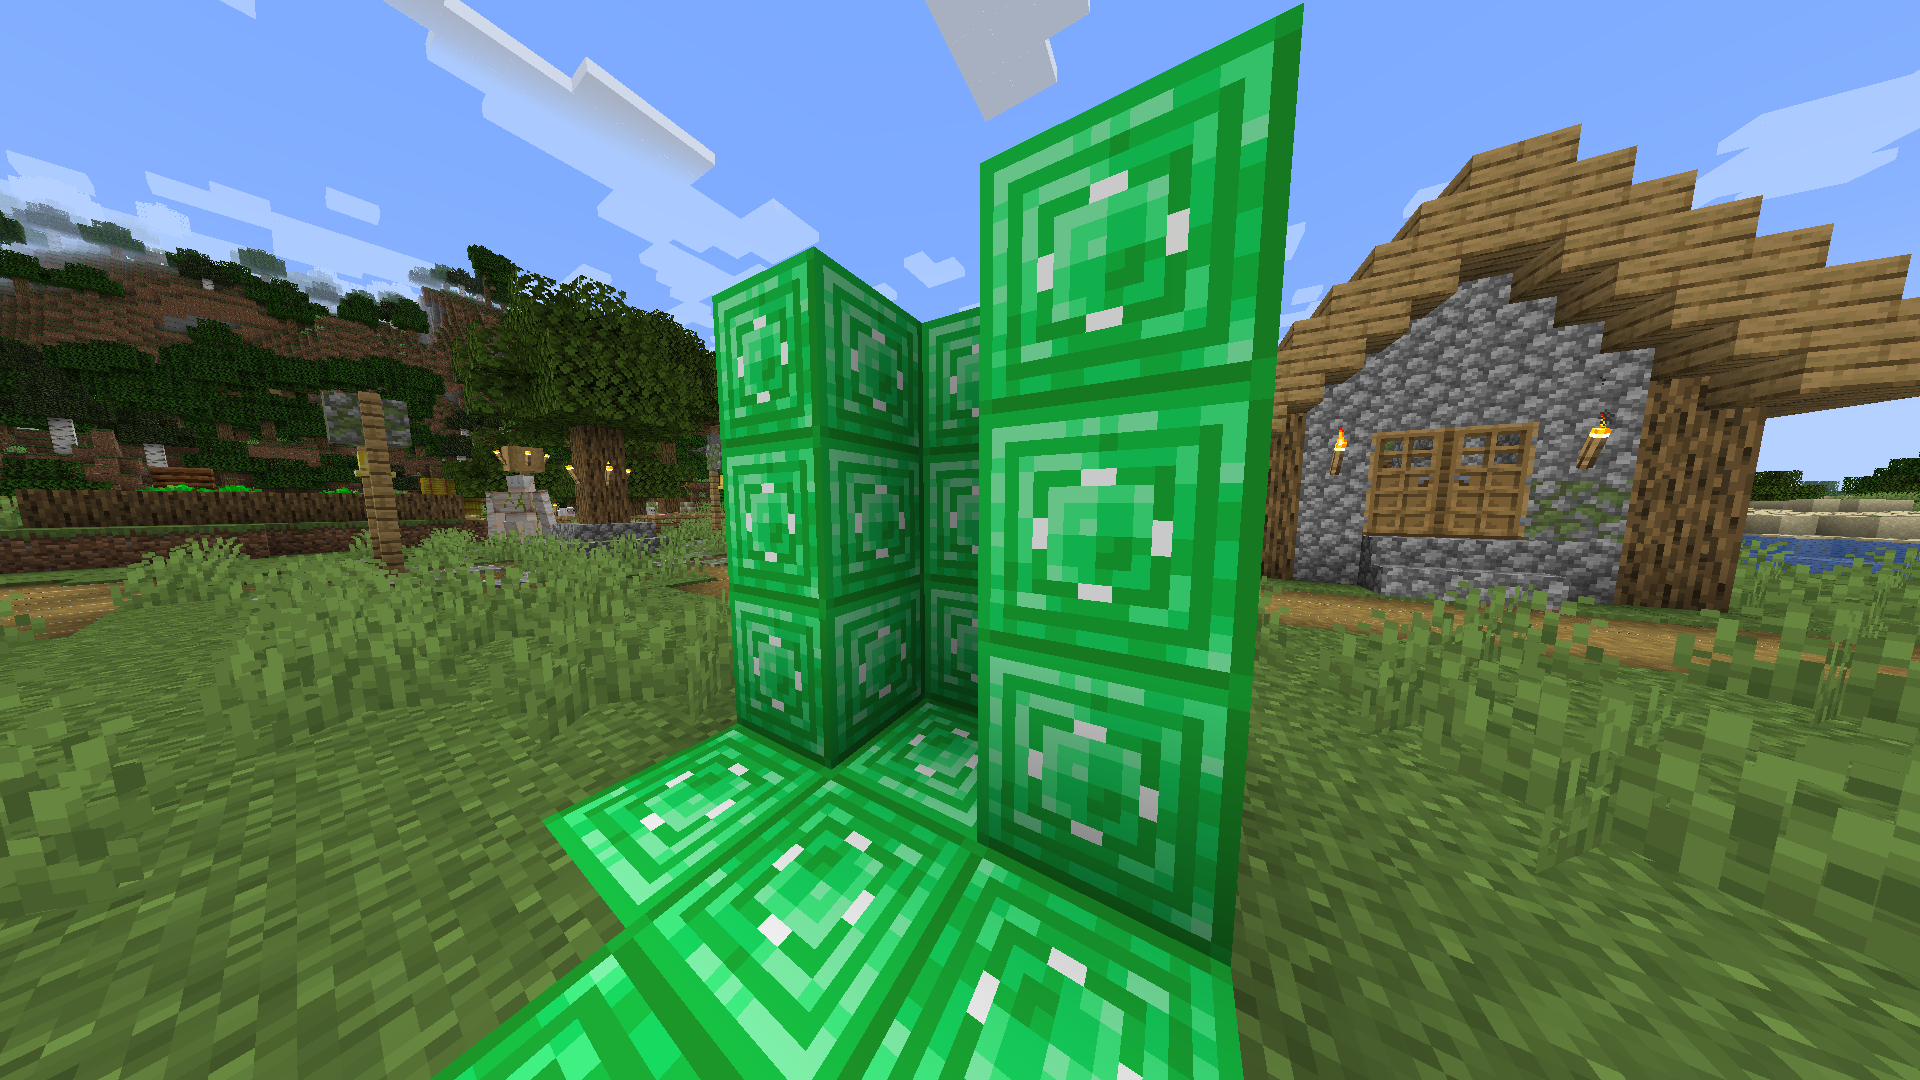 This shows off the shine animation on the emerald block